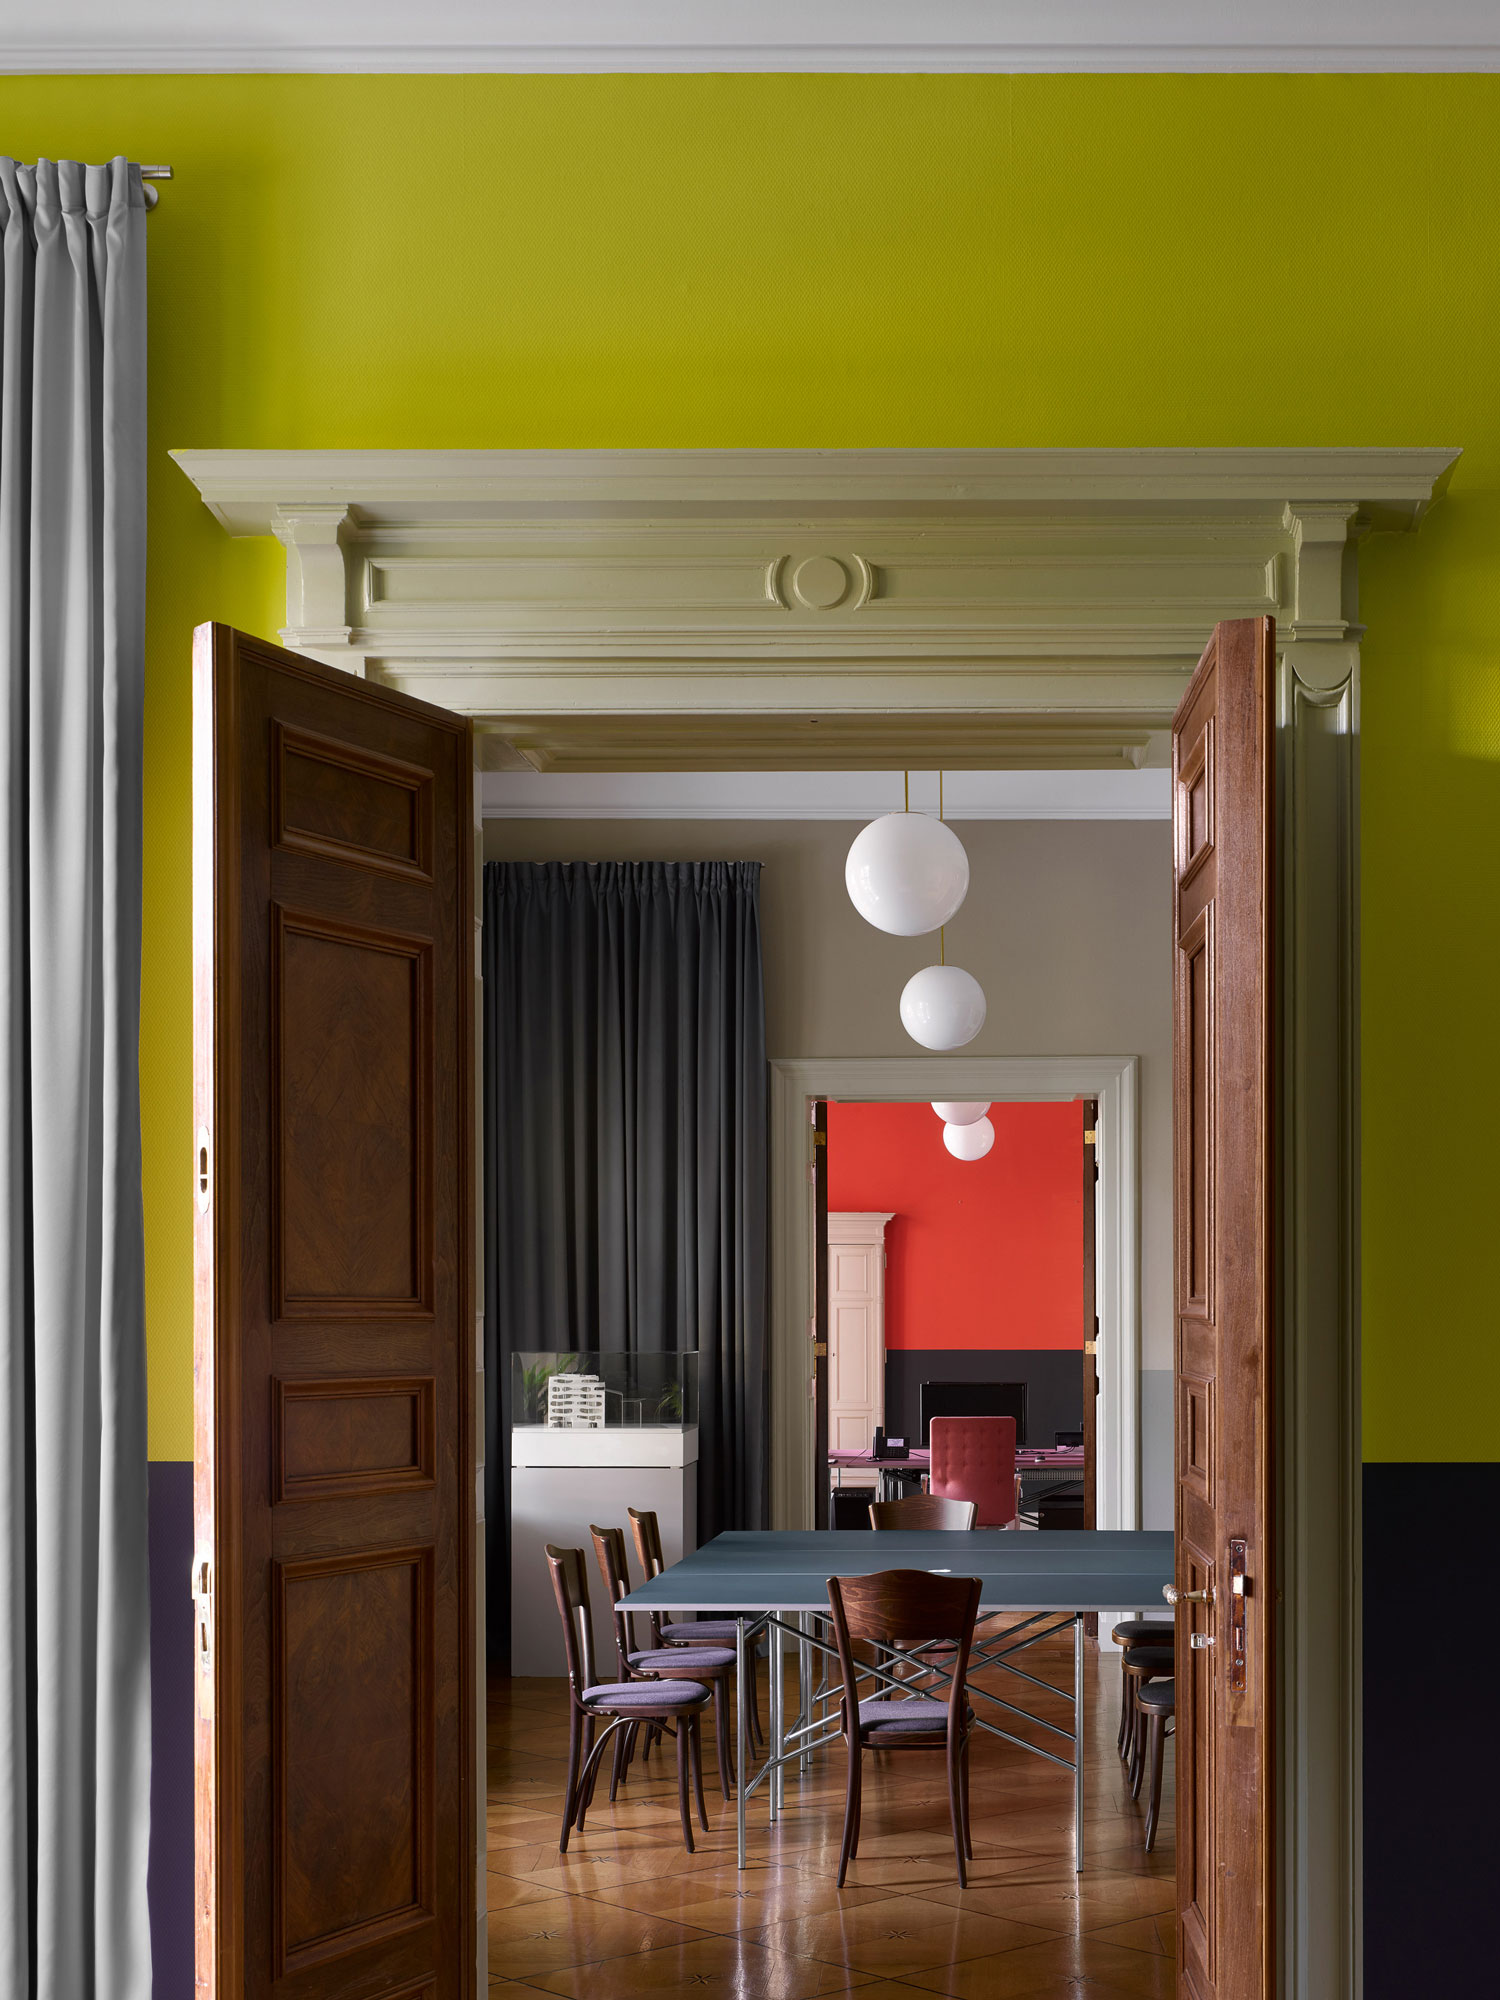 Grand C19th Palais in Berlin Reimagined as an Office by David Kohn Architects.-2